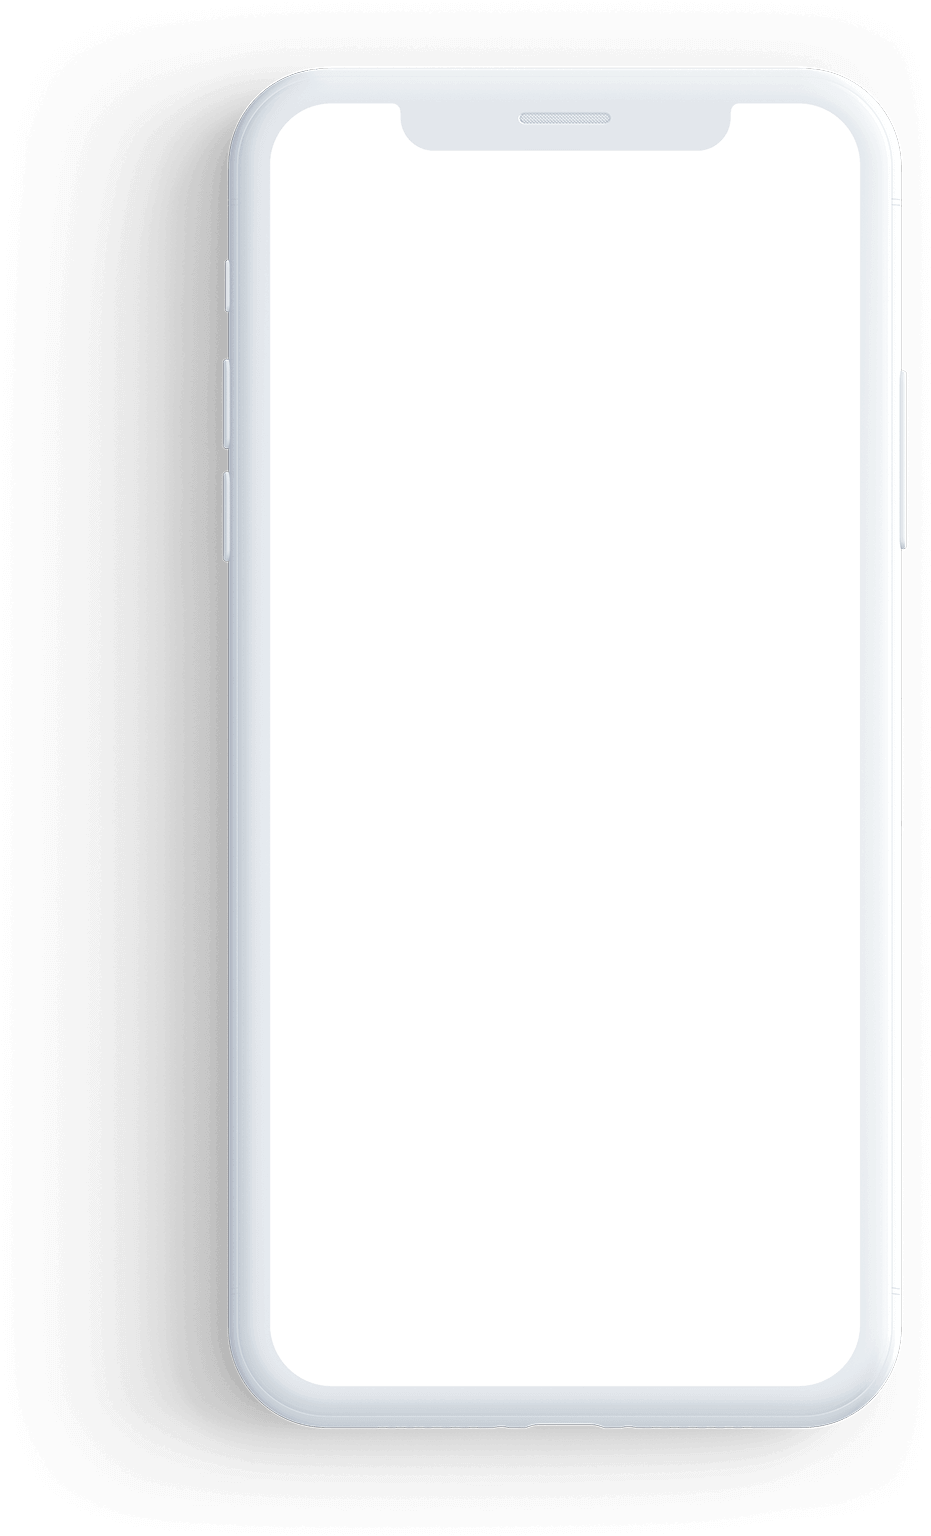 Smartphone Blank Screen Template PNG image